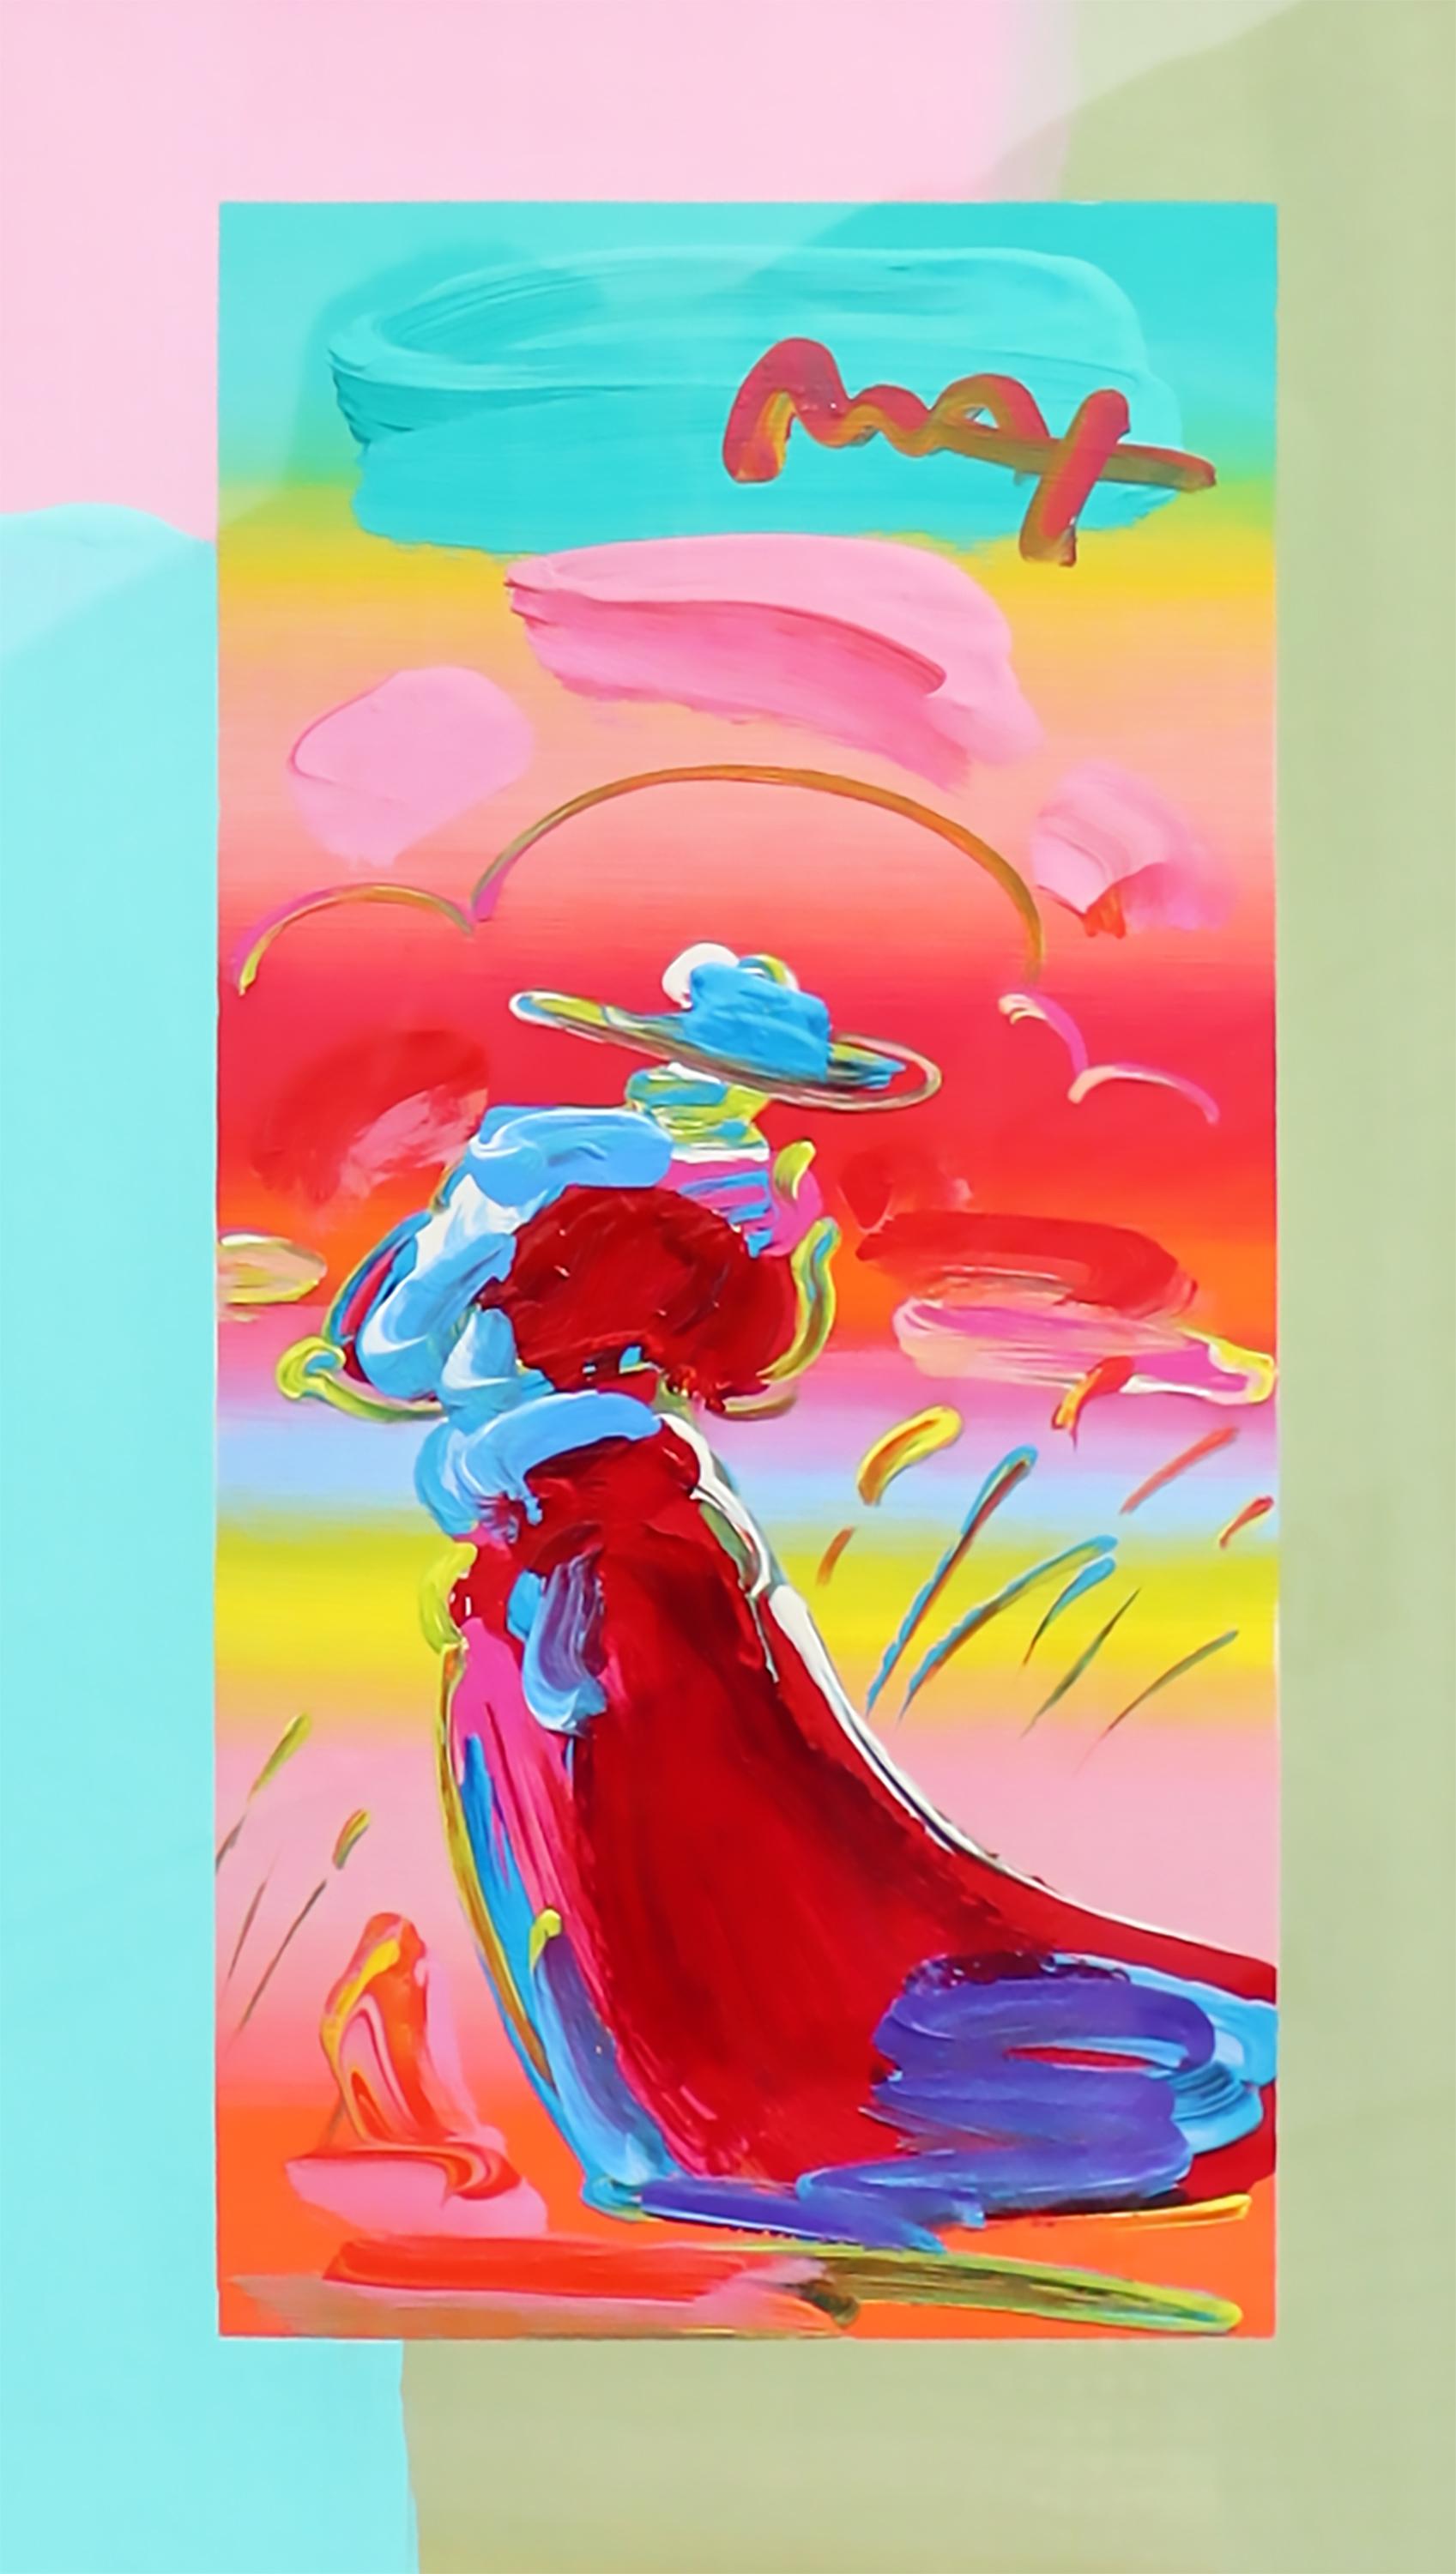 Walking in Reeds, The Sage - Mixed Media Art by Peter Max